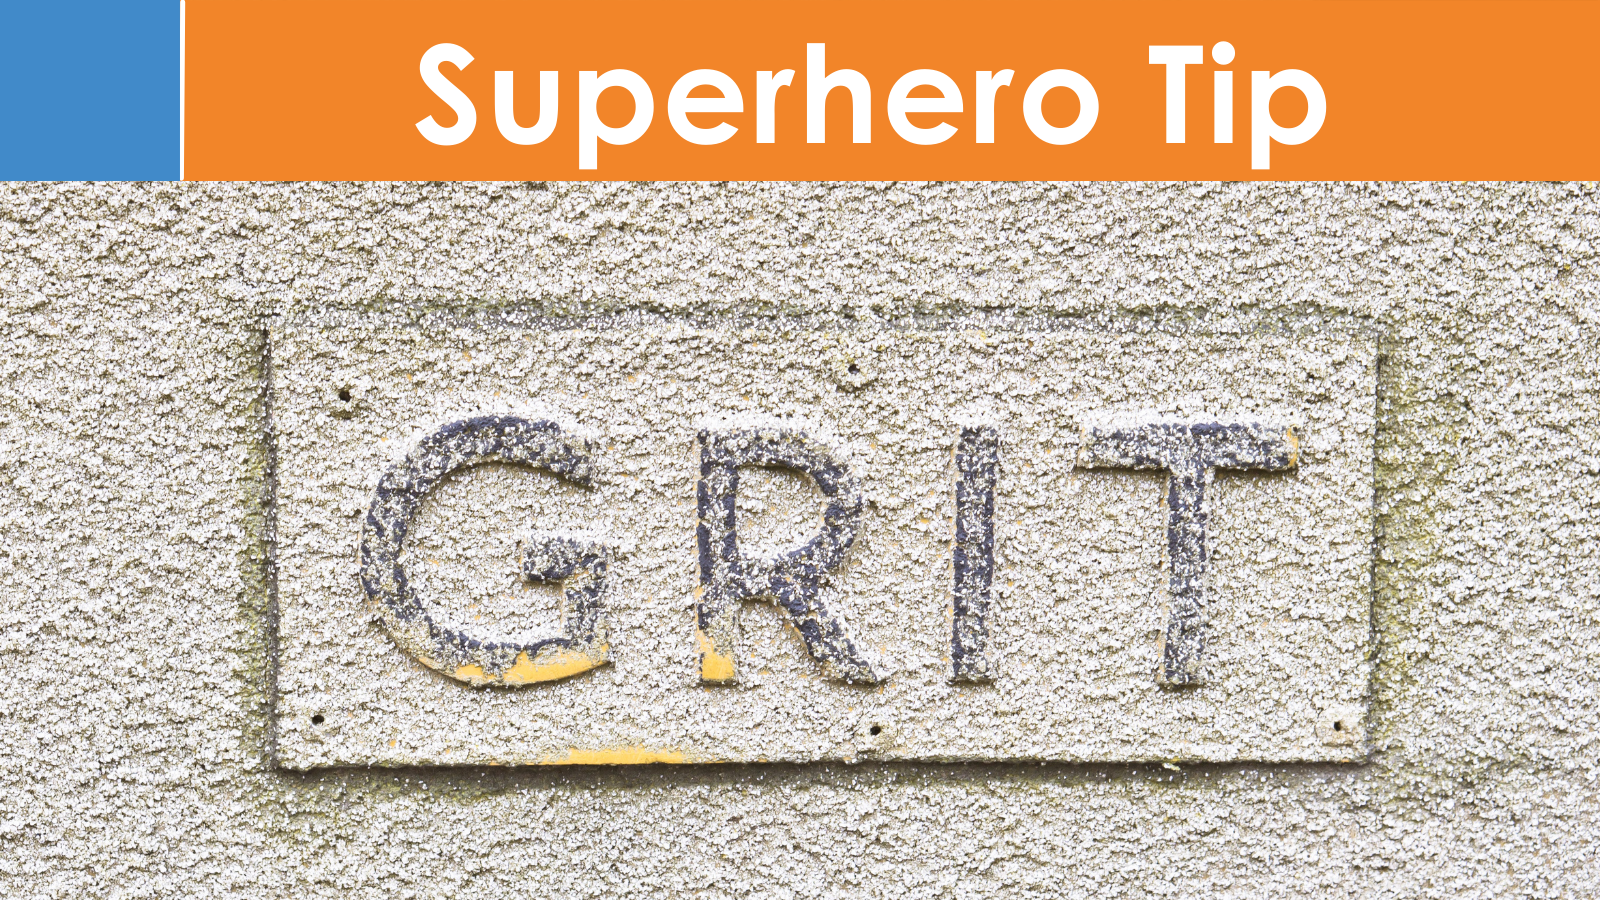 What is one of the strongest predictors of academic success for students? In this superhero tip, we’ll explore the answer to this!